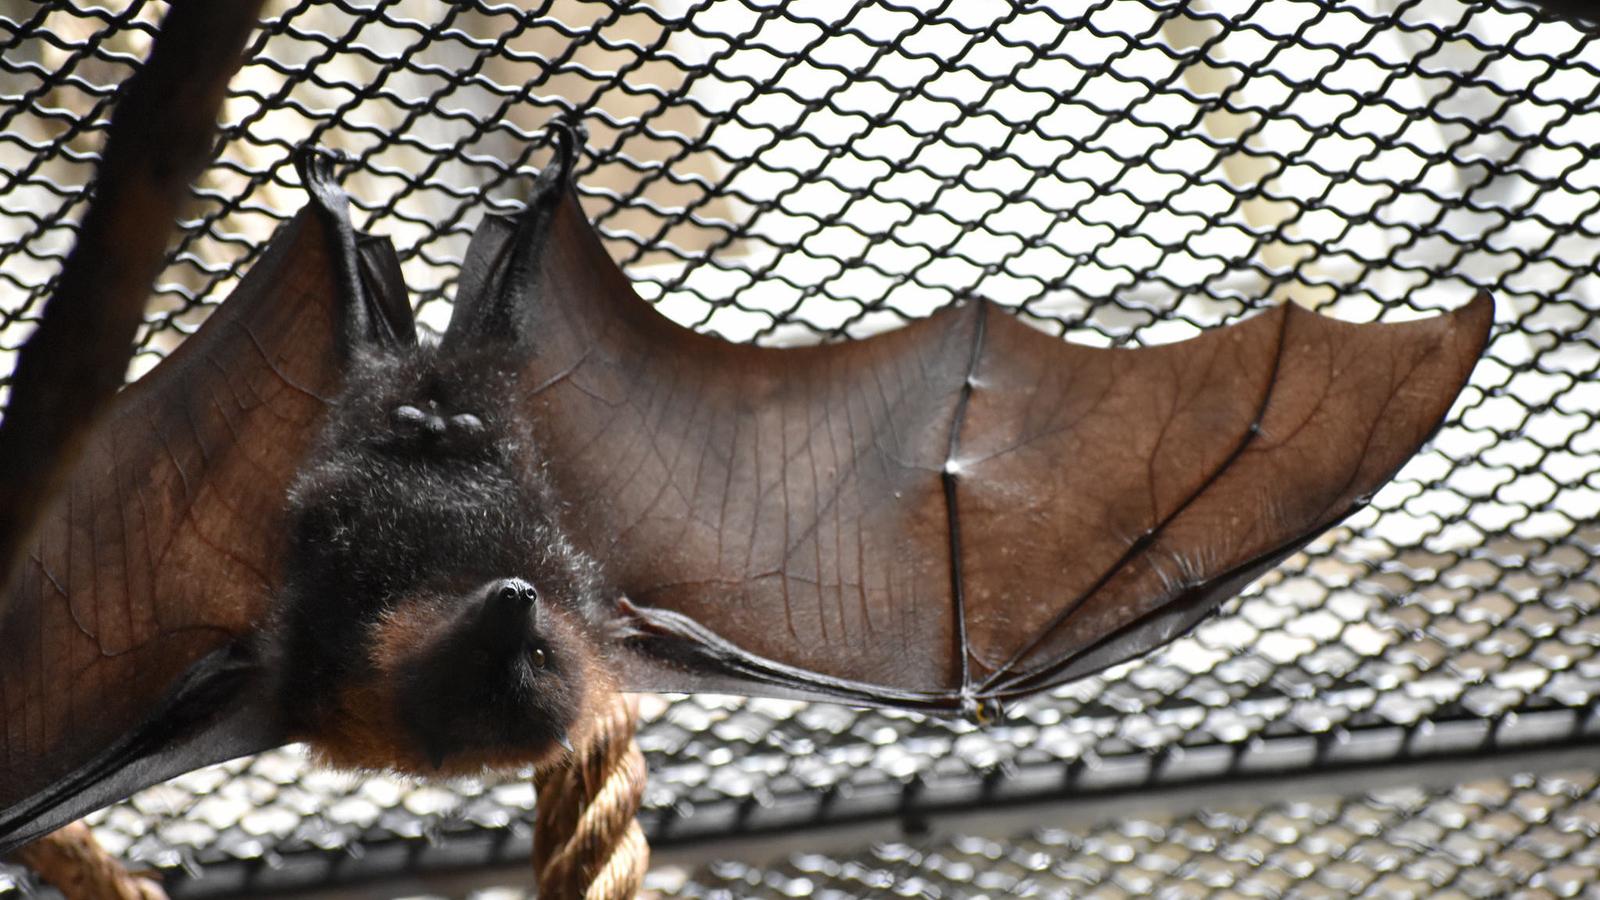 Bats have a specialized thin skin that allows their wings to change when a muscle is activated with every beat cycle of the wings. 